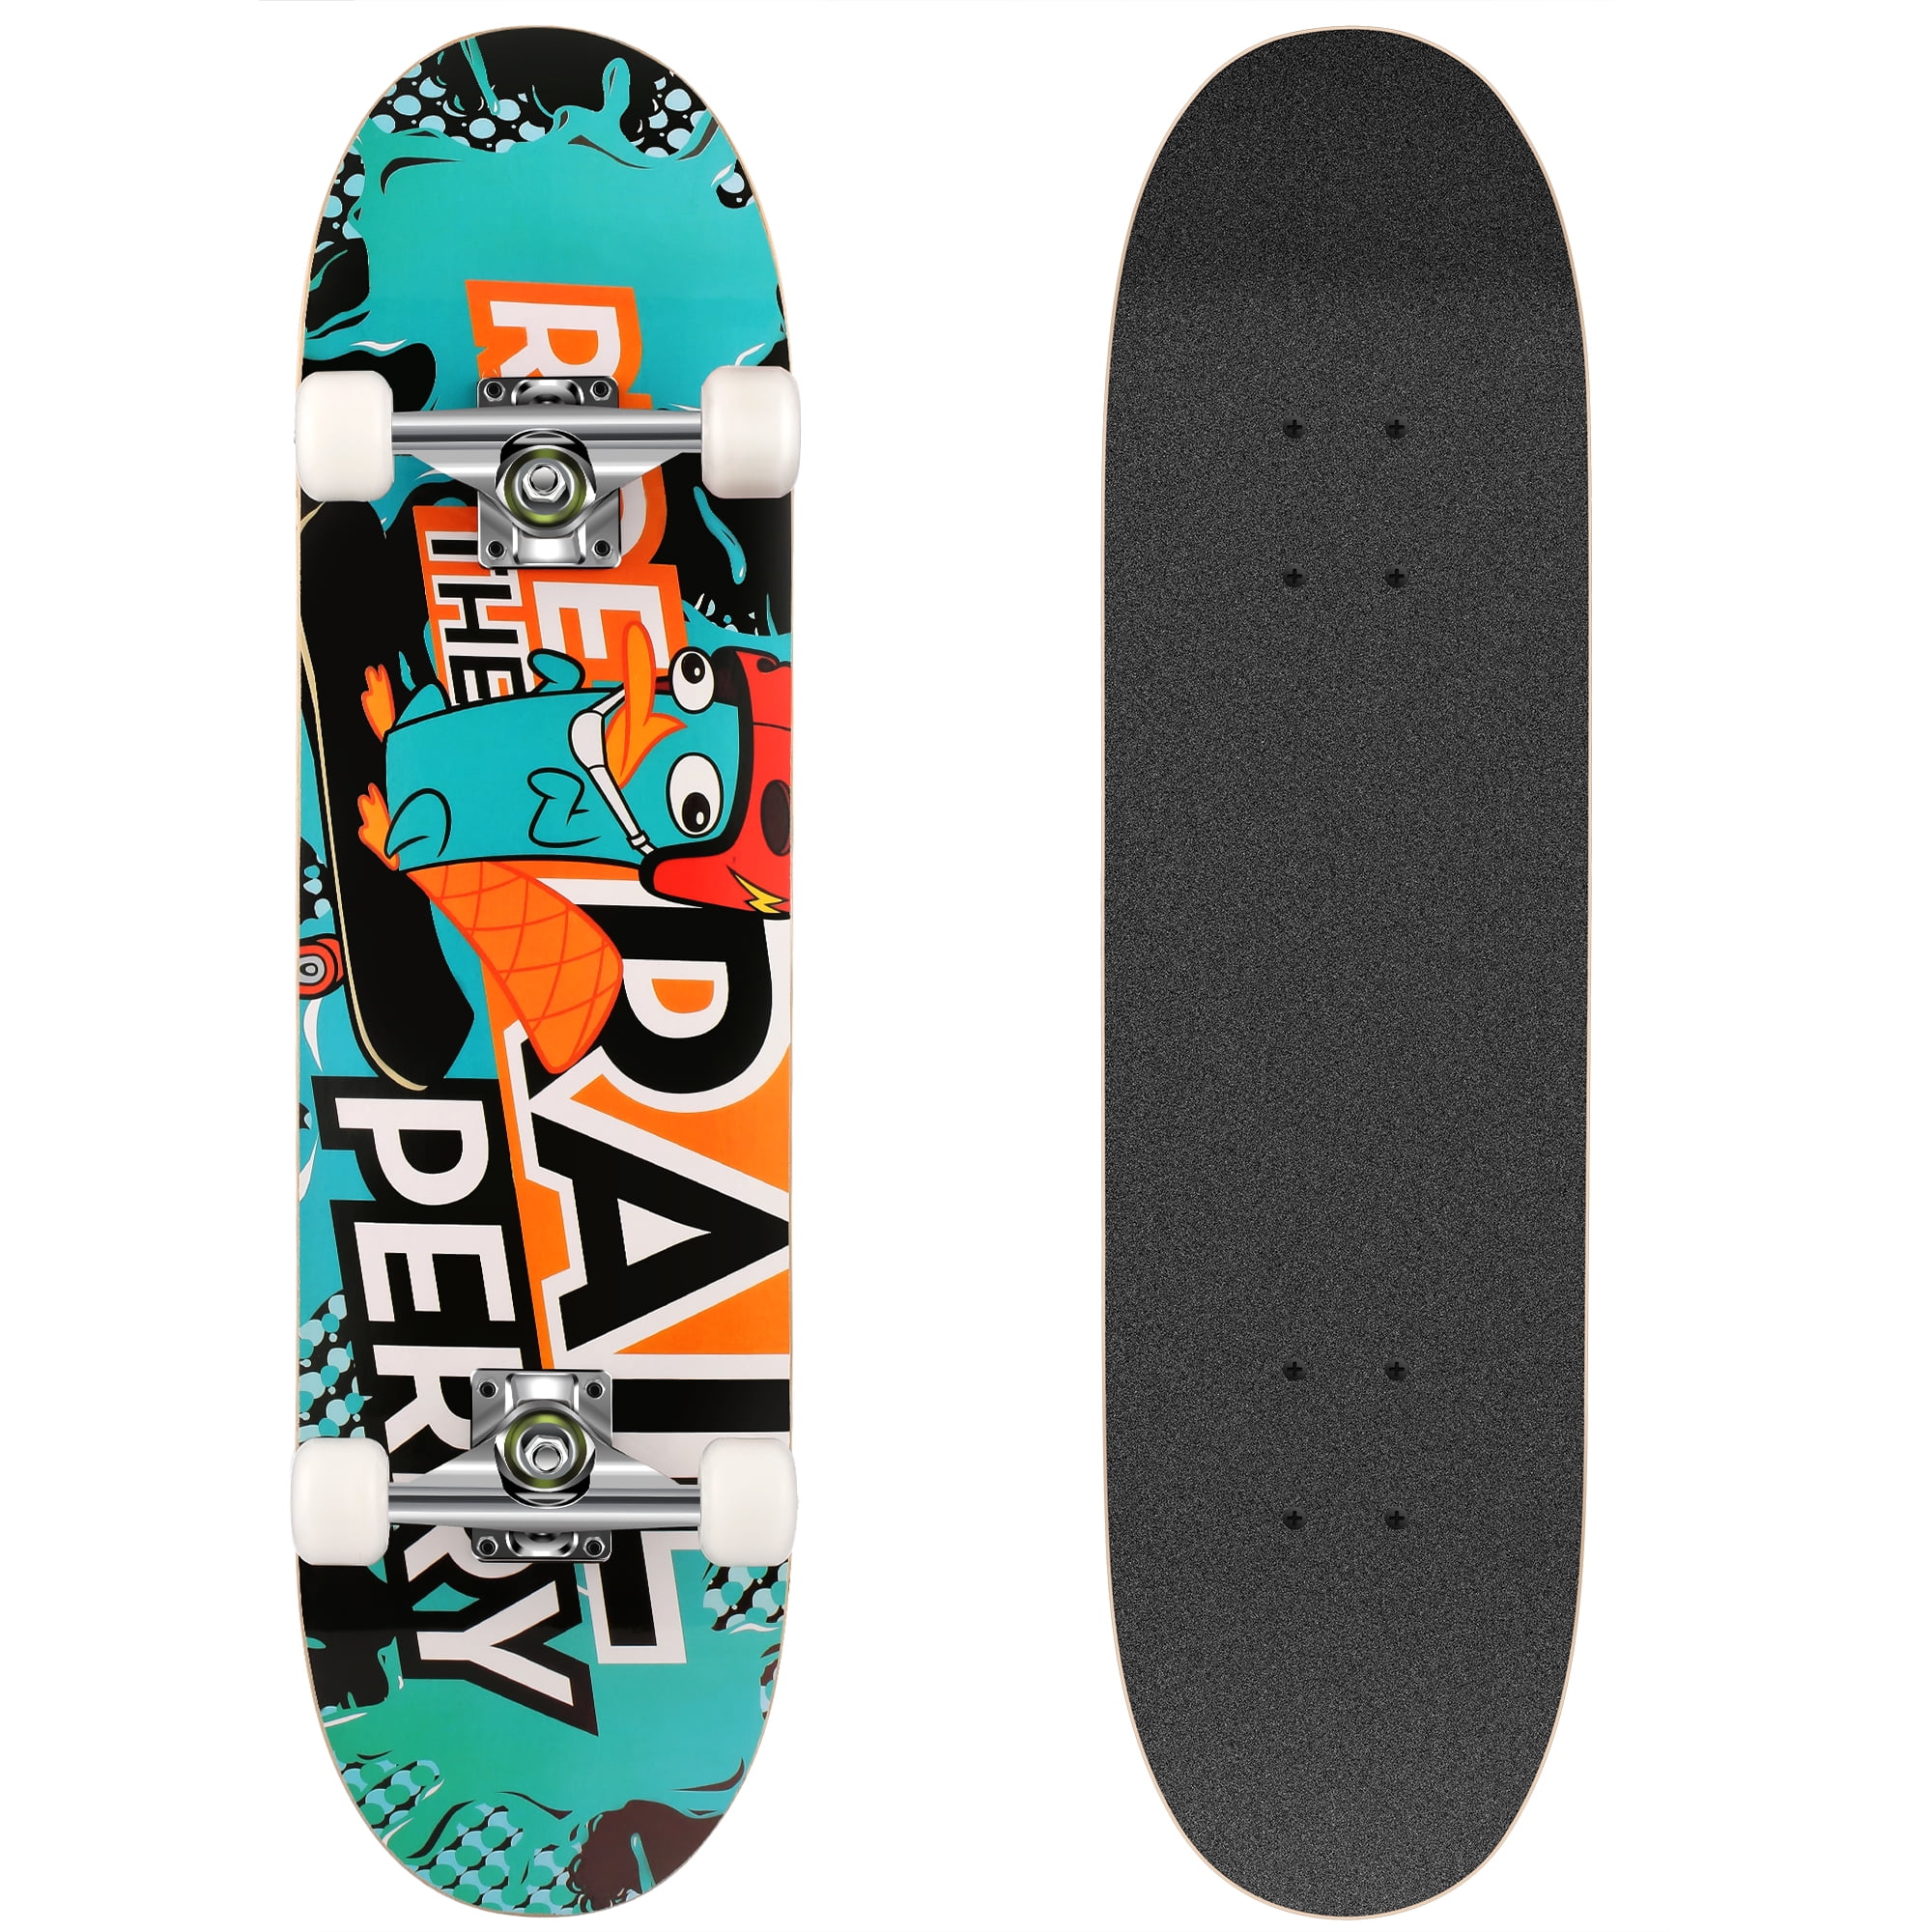 7 Layer Canadian B e 200 Details about  / Skateboards for Beginners Complete Skateboard 31 x 8